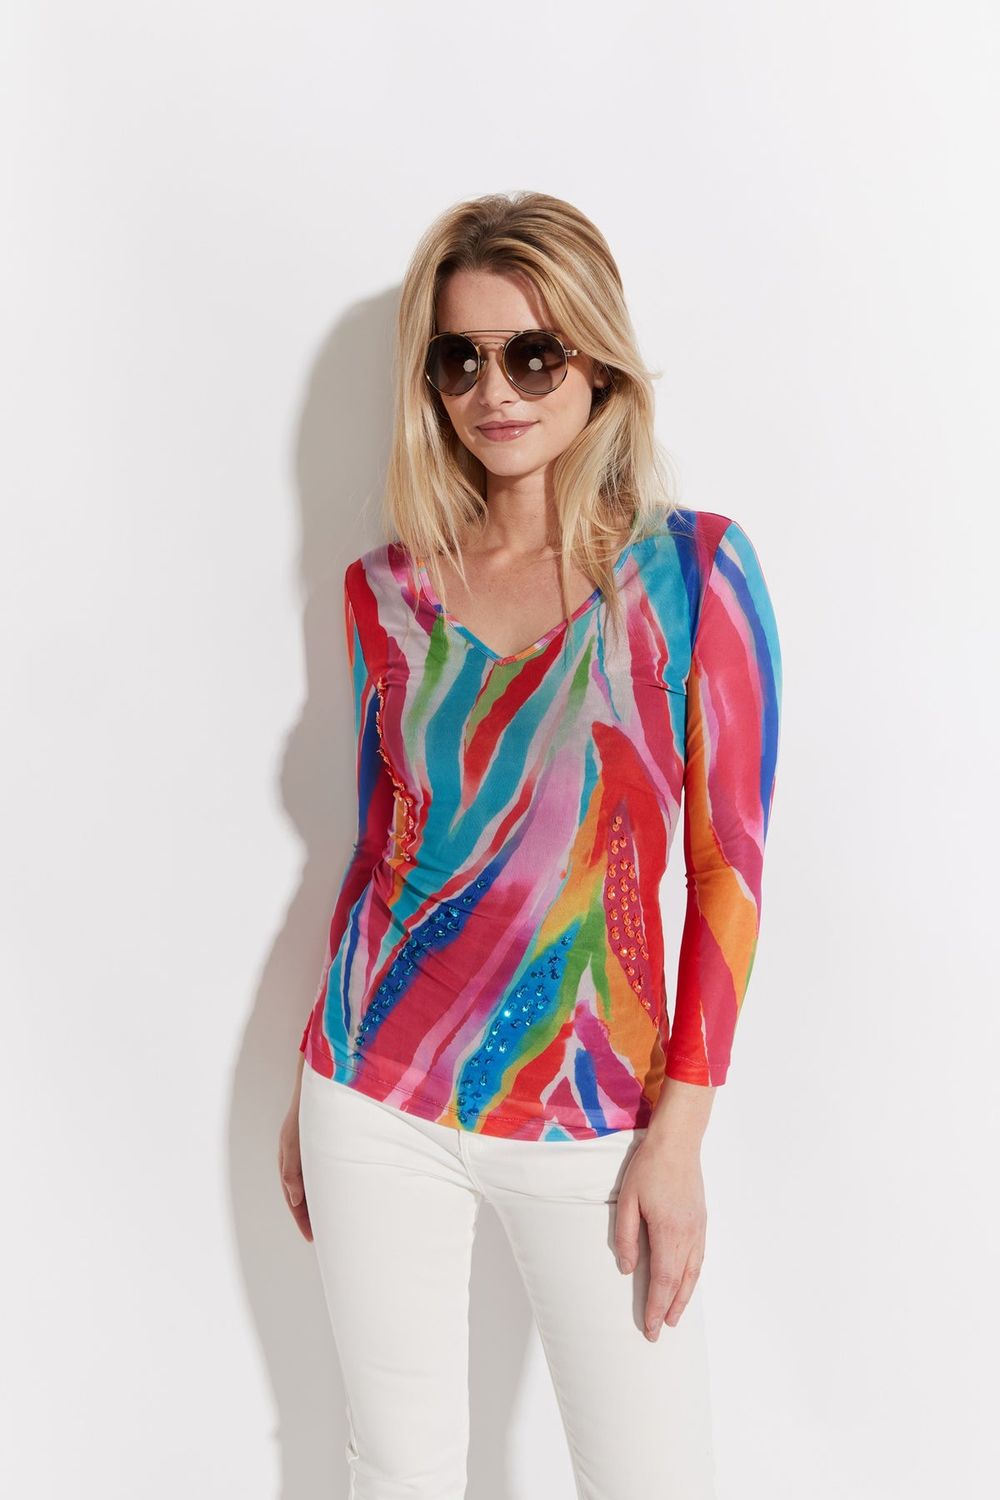 OOLALA Printed 3/4 Sleeve V-Neck Top w/ Sequins, Color: Multi, Size: S